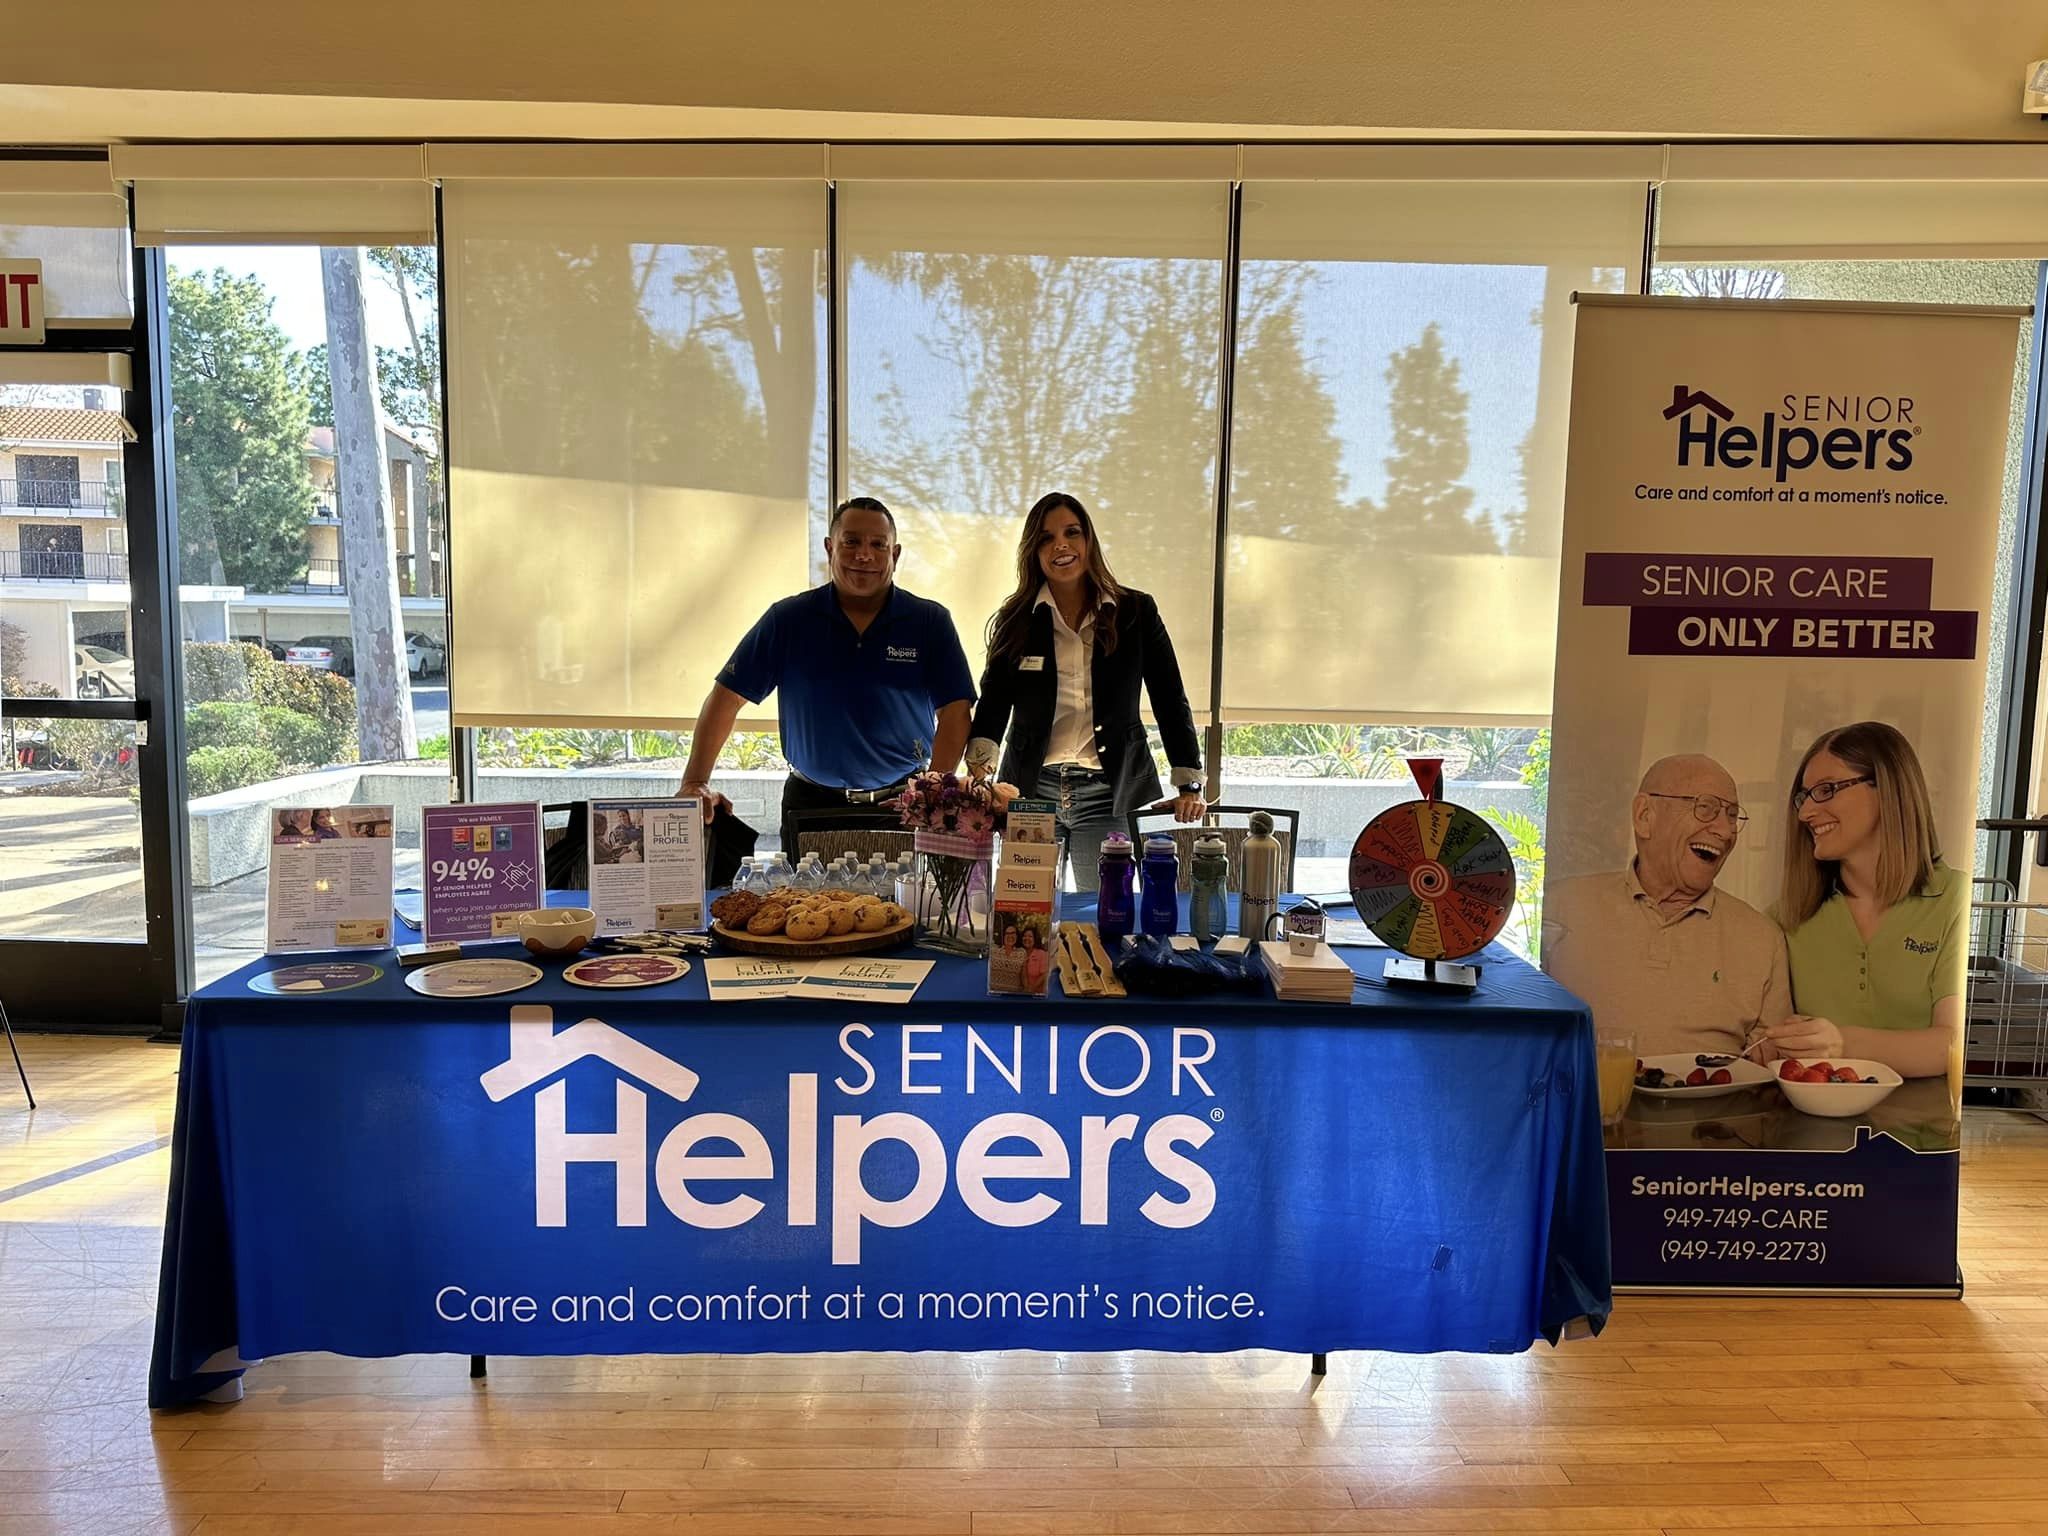 Great time today at Laguna Woods Village. Always great to educate our seniors on the benefits of having in-home care to age gracefully and safely at home.